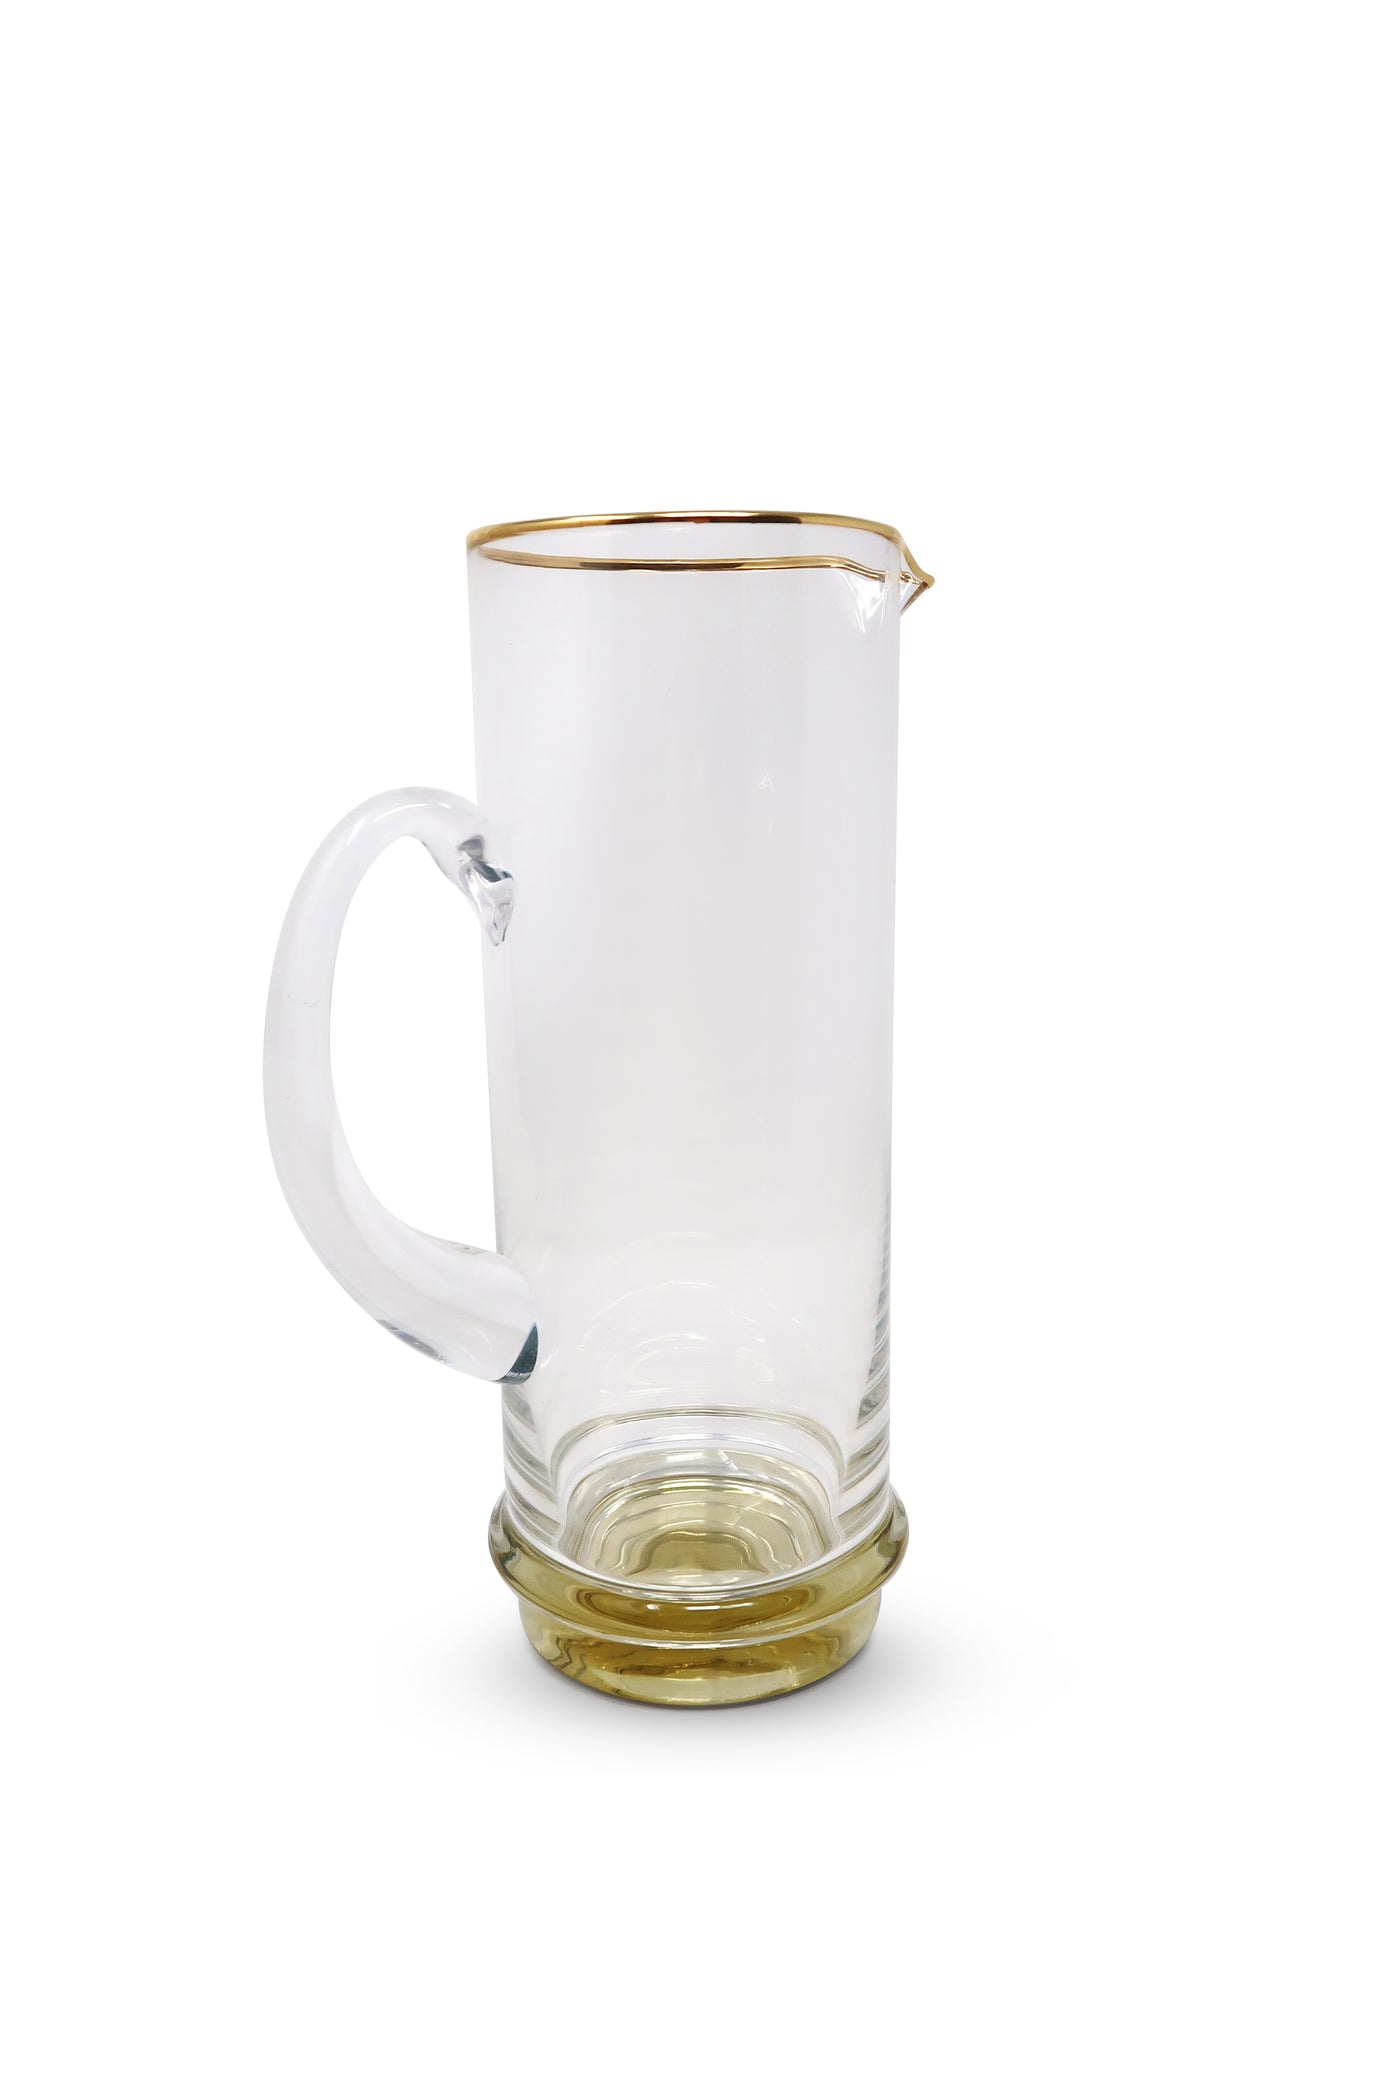 Pitcher with Gold Base and Rim, 10.5"H